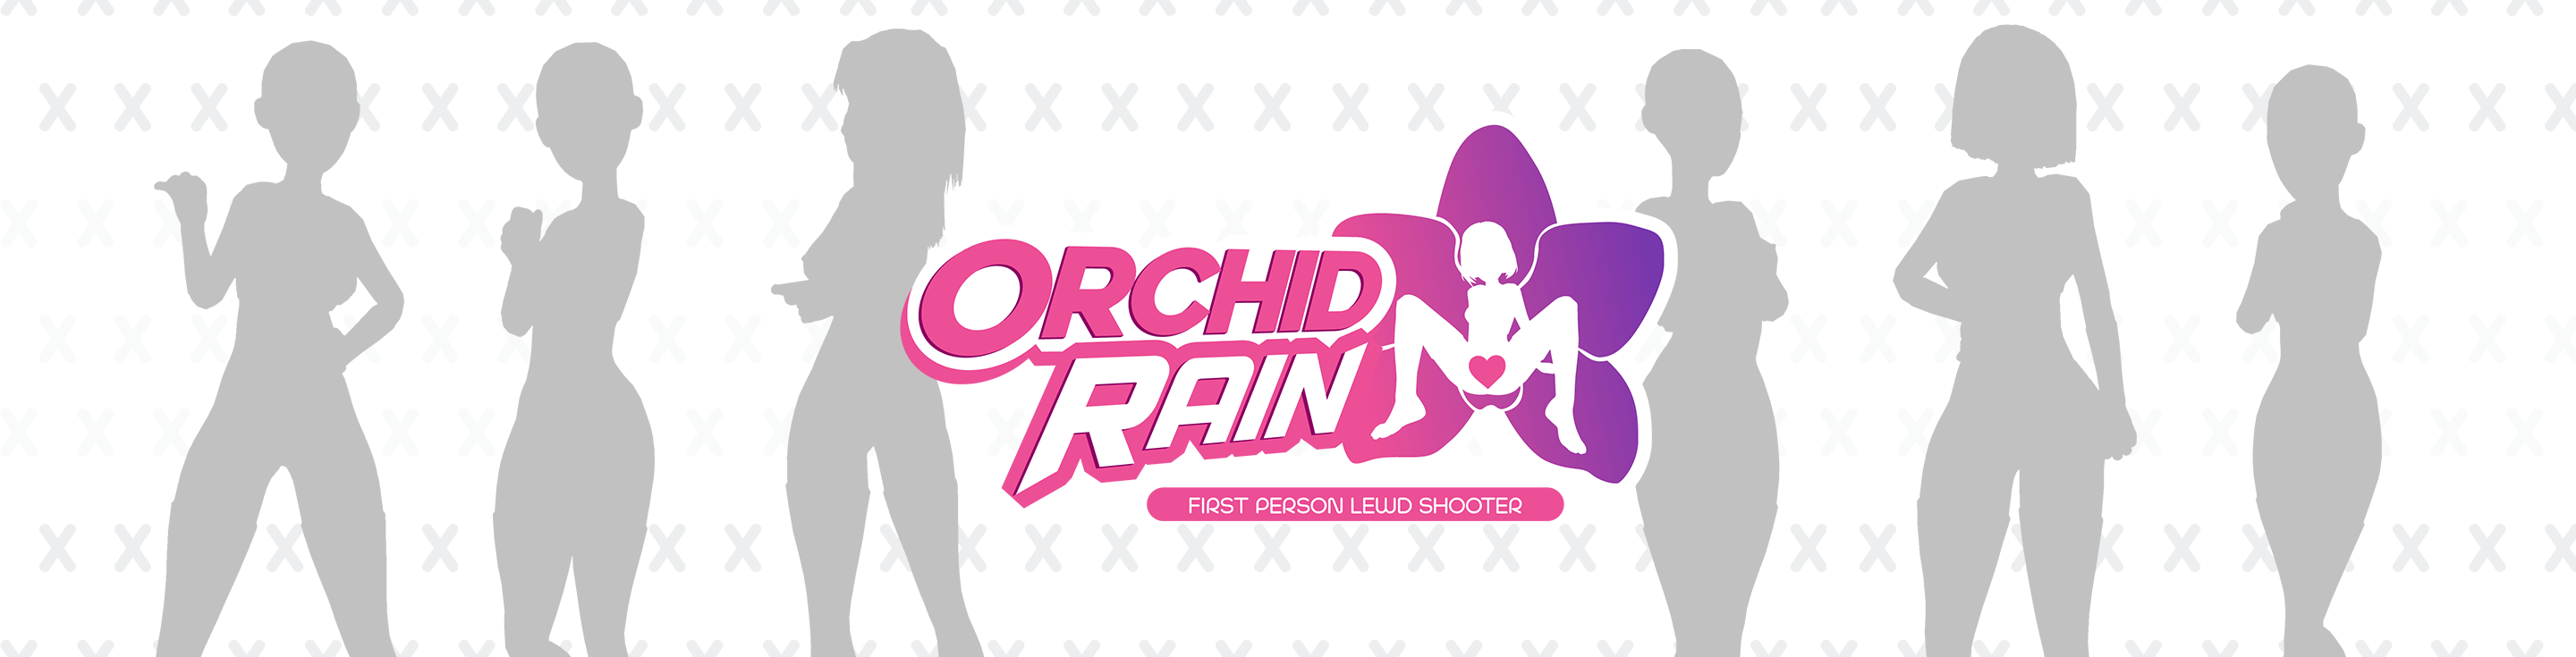 Orchid Rain - Mission 03 build (outdated)